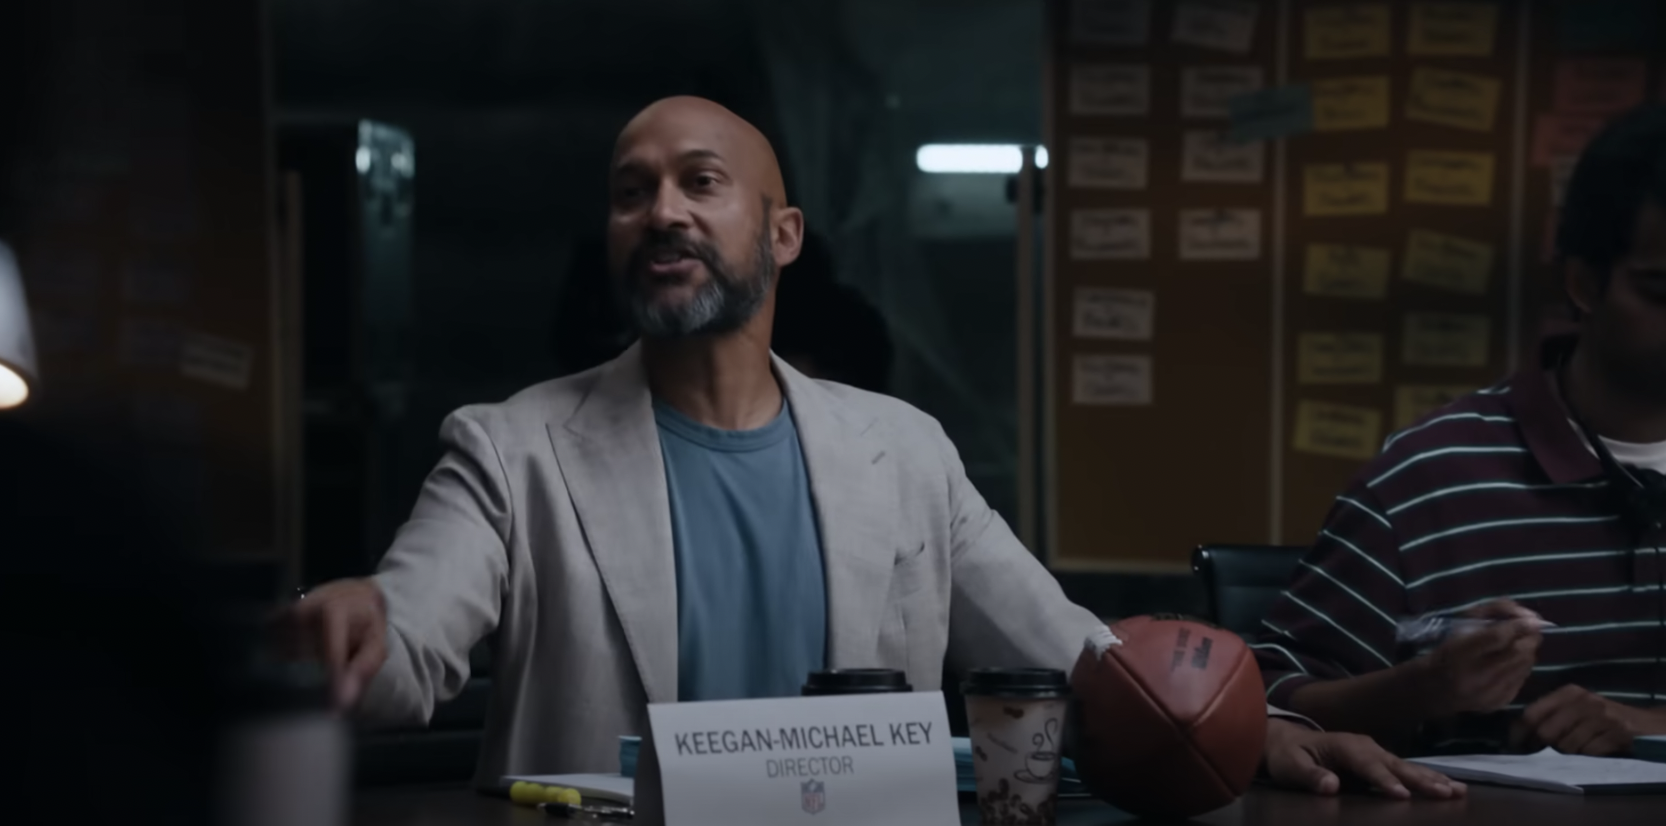 Keegan-Michael Key is the director of the NFL reality show in this campaign to celebrate the opening of the 2023 season.